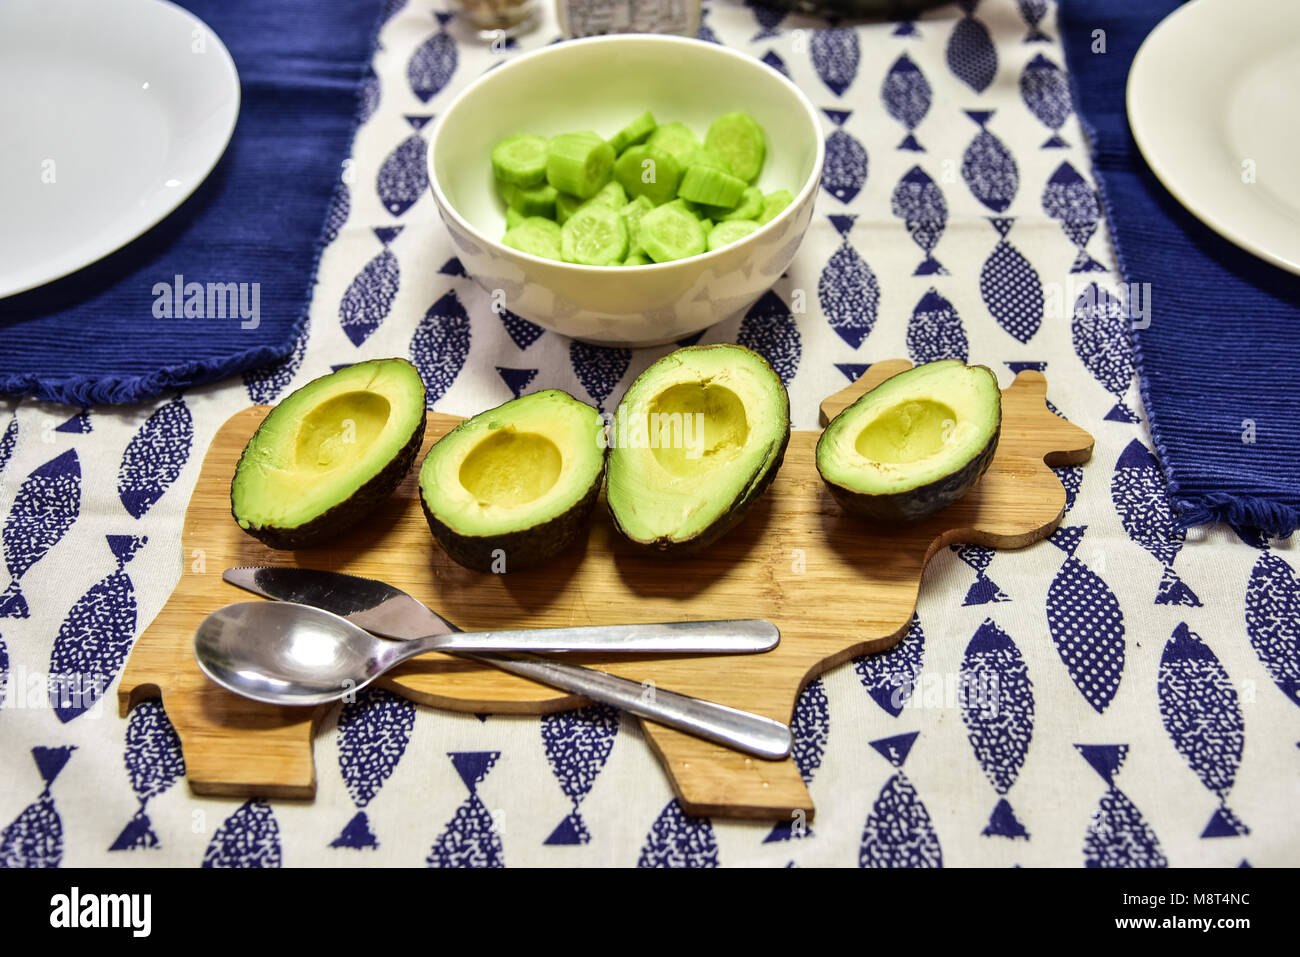 https://c8.alamy.com/comp/M8T4NC/4-halved-avocados-sit-on-a-cute-cow-shaped-wooden-cutting-board-a-M8T4NC.jpg